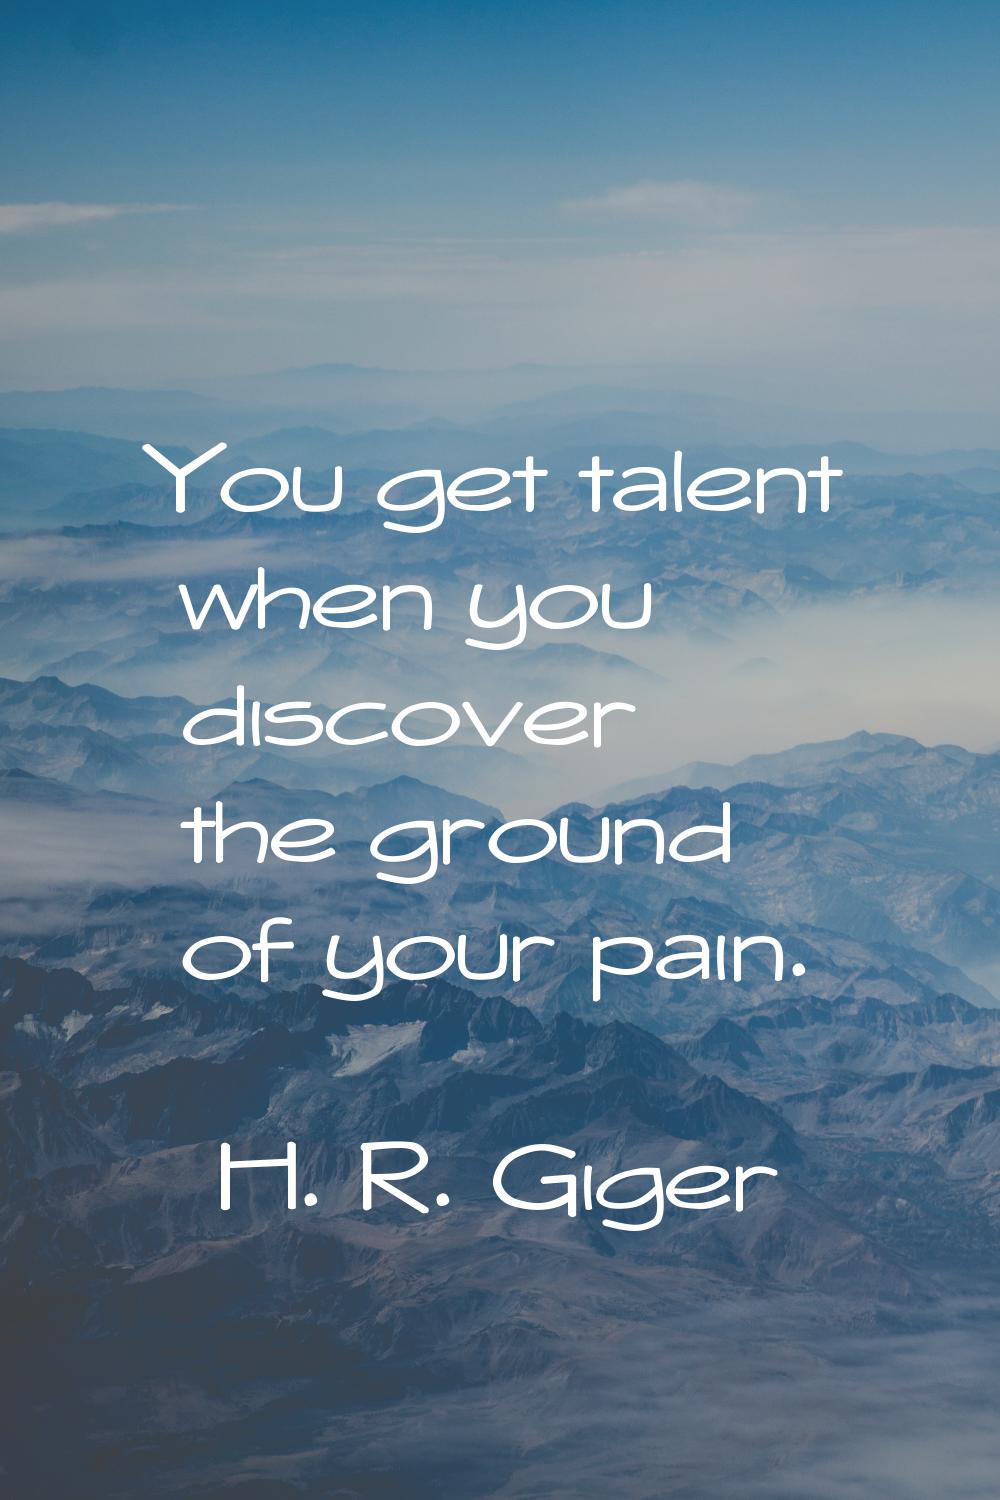 You get talent when you discover the ground of your pain.